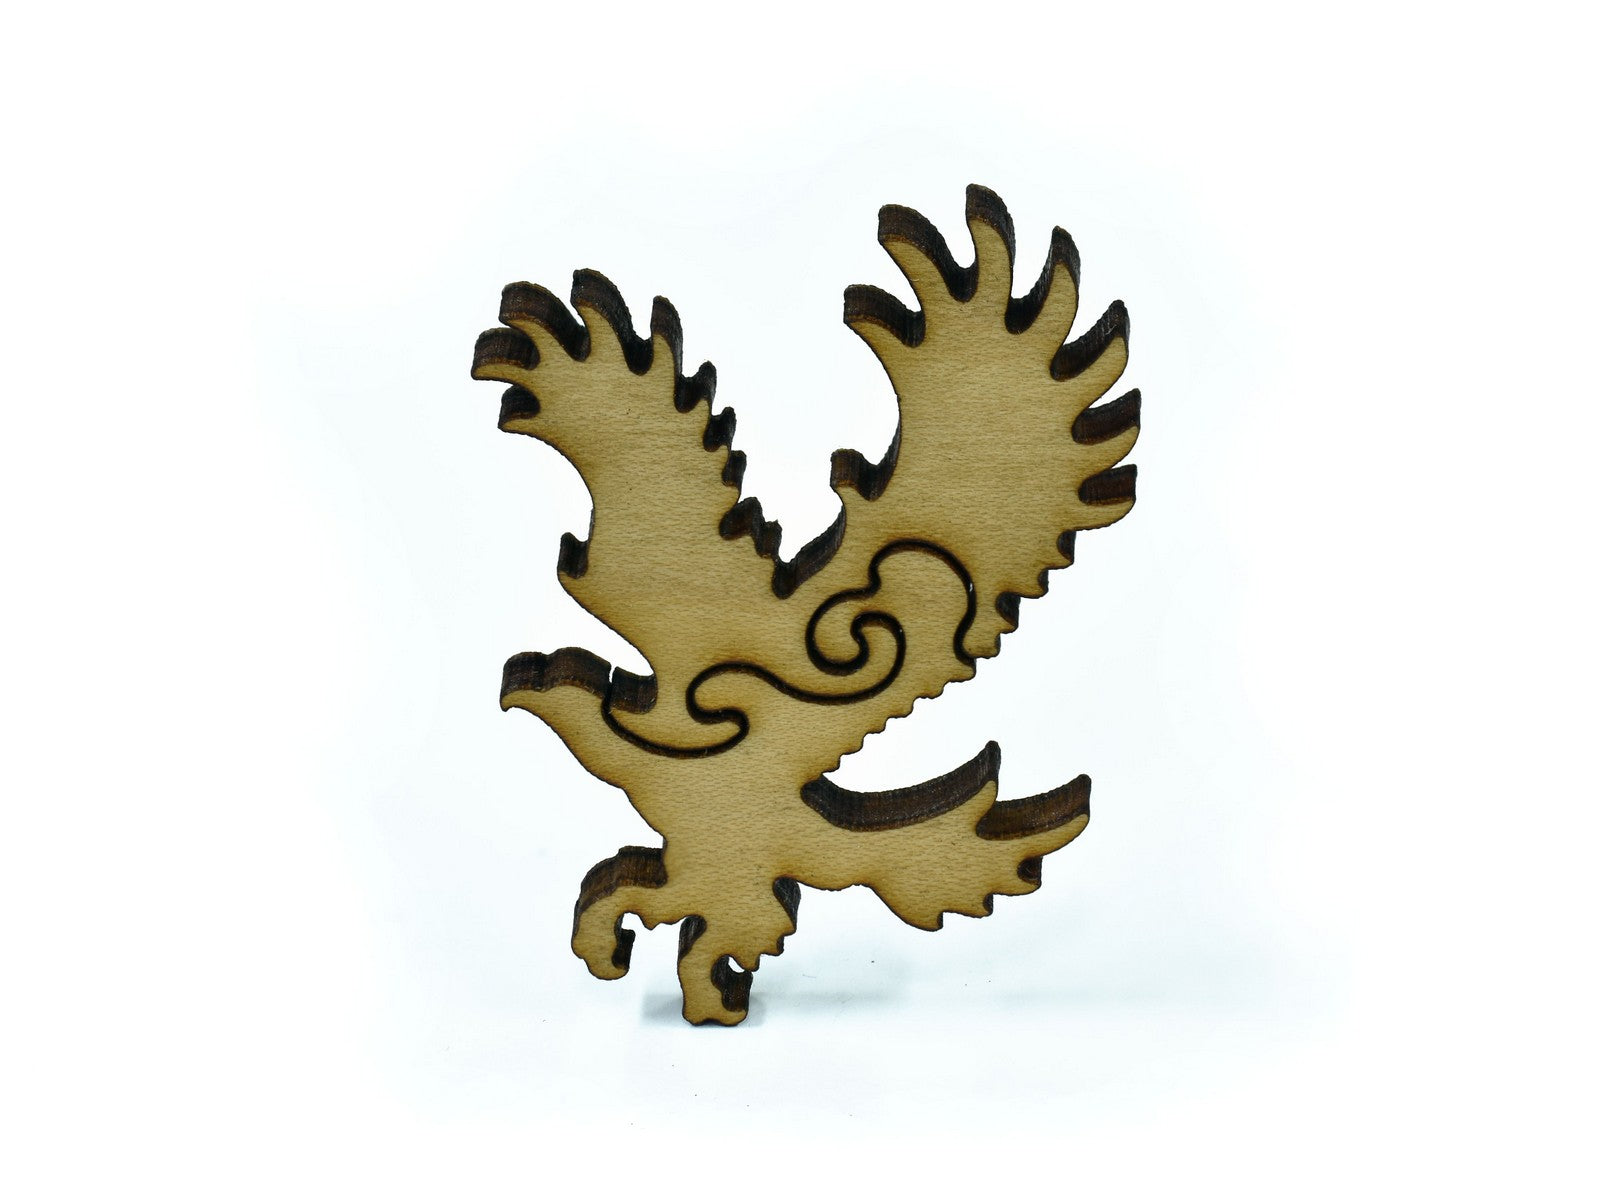 A closeup of pieces in the shape of an eagle.